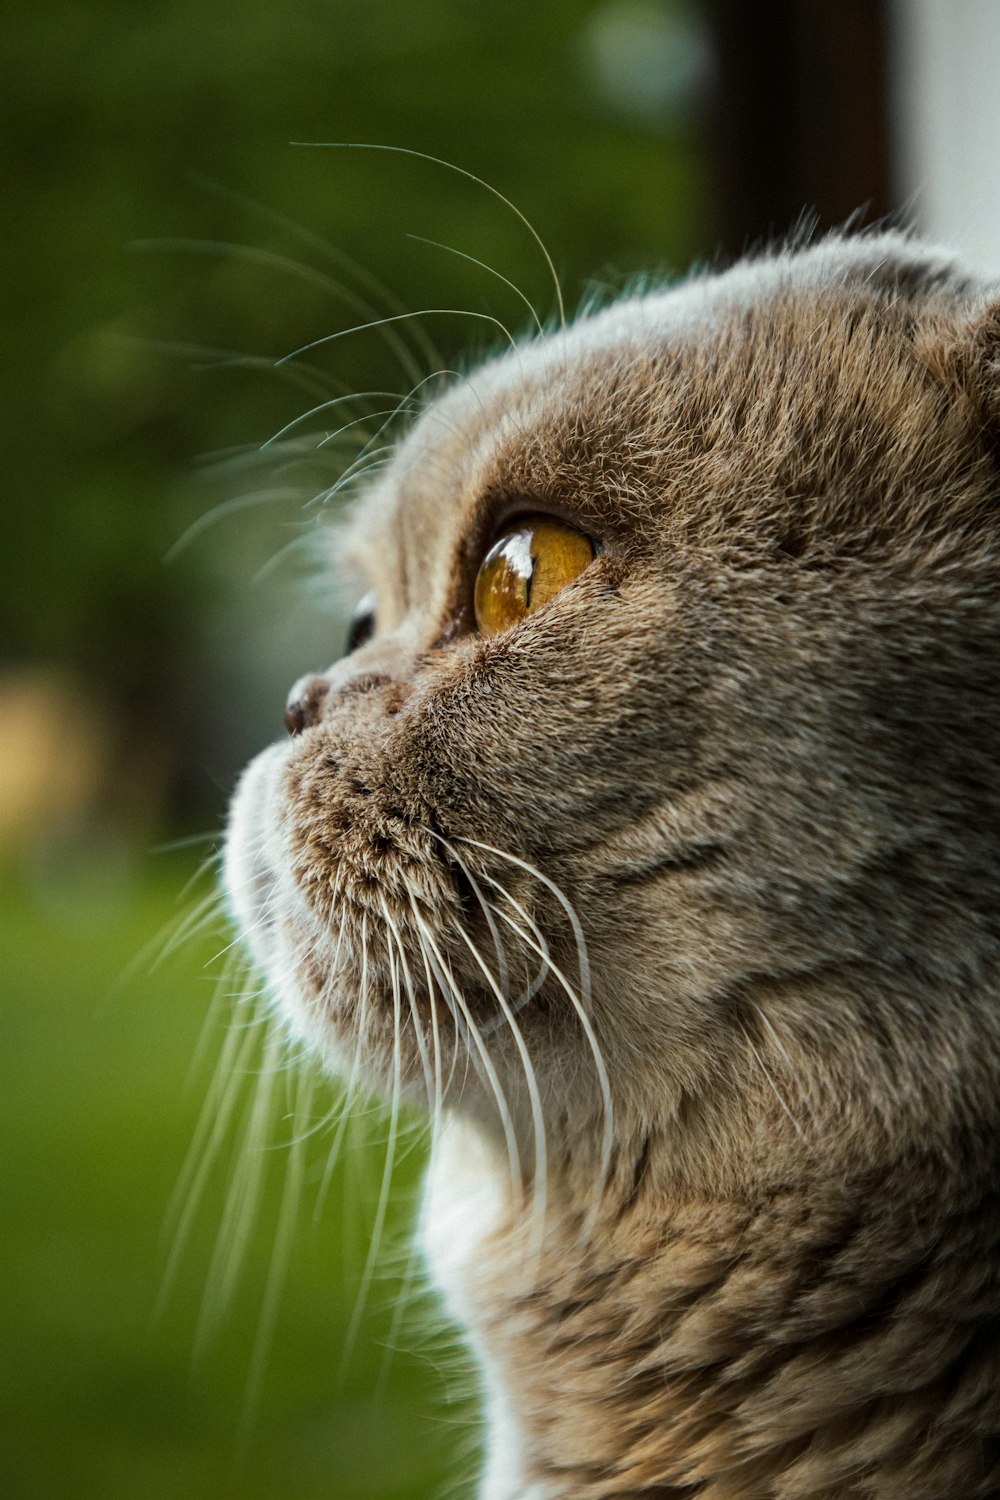 a close up of a cat looking off into the distance